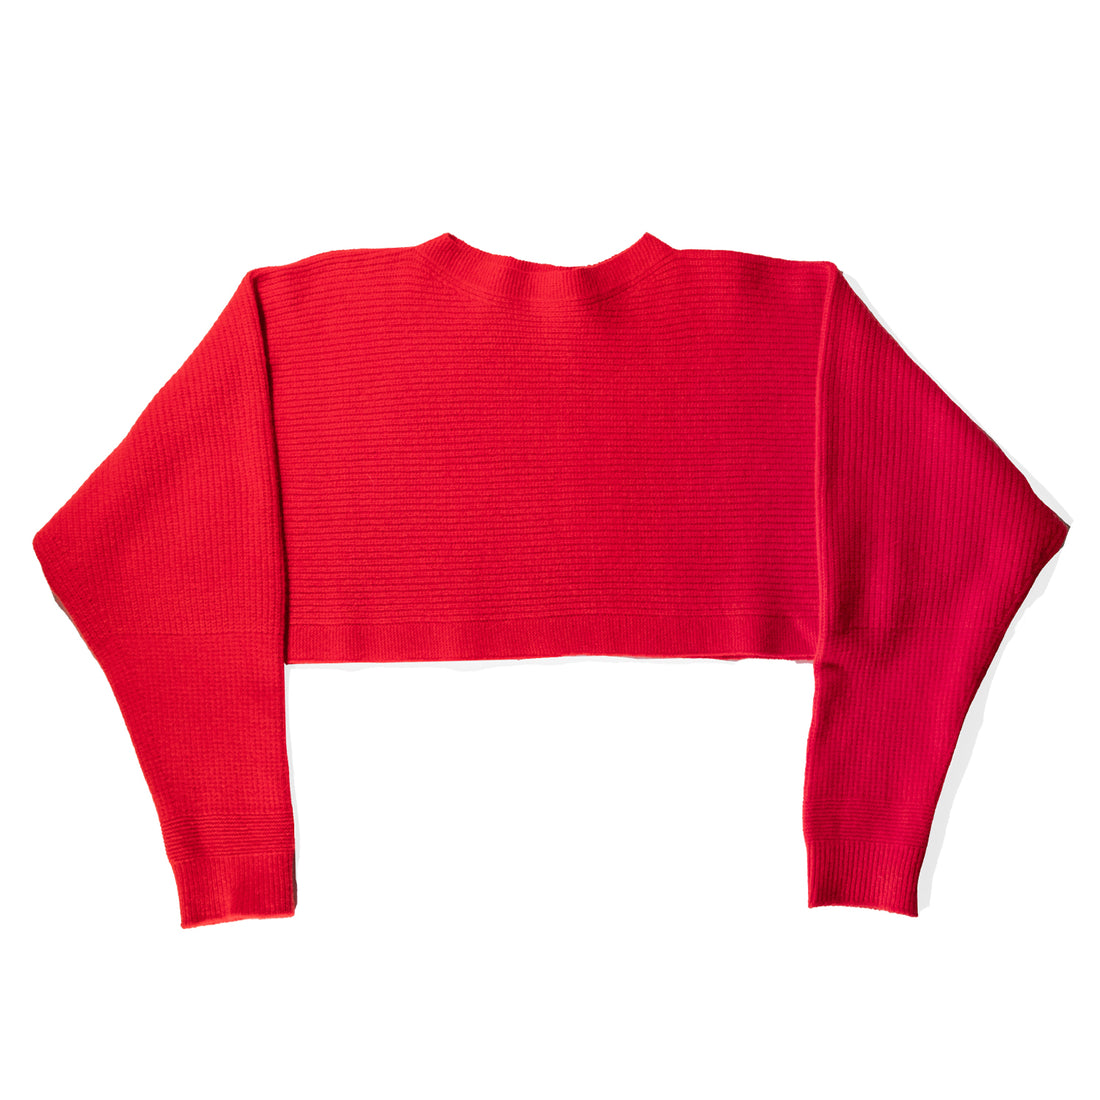 Nicholson & Nicholson Pigalle Cropped Sweater in Red